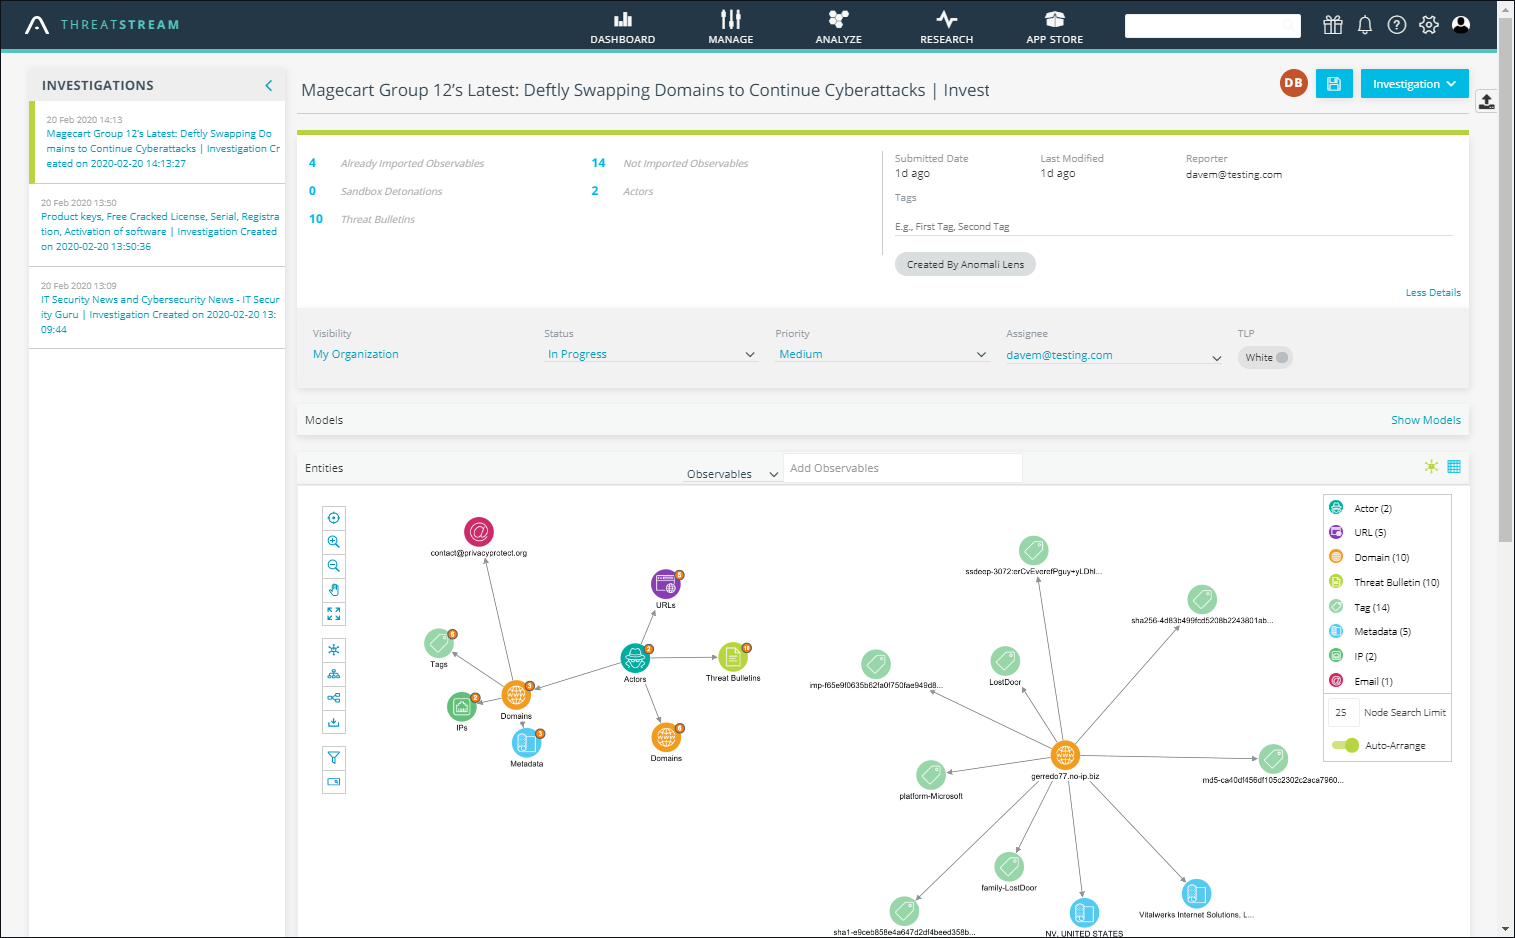 The Investigations page provides a collaborative workspace for deep threat analysis